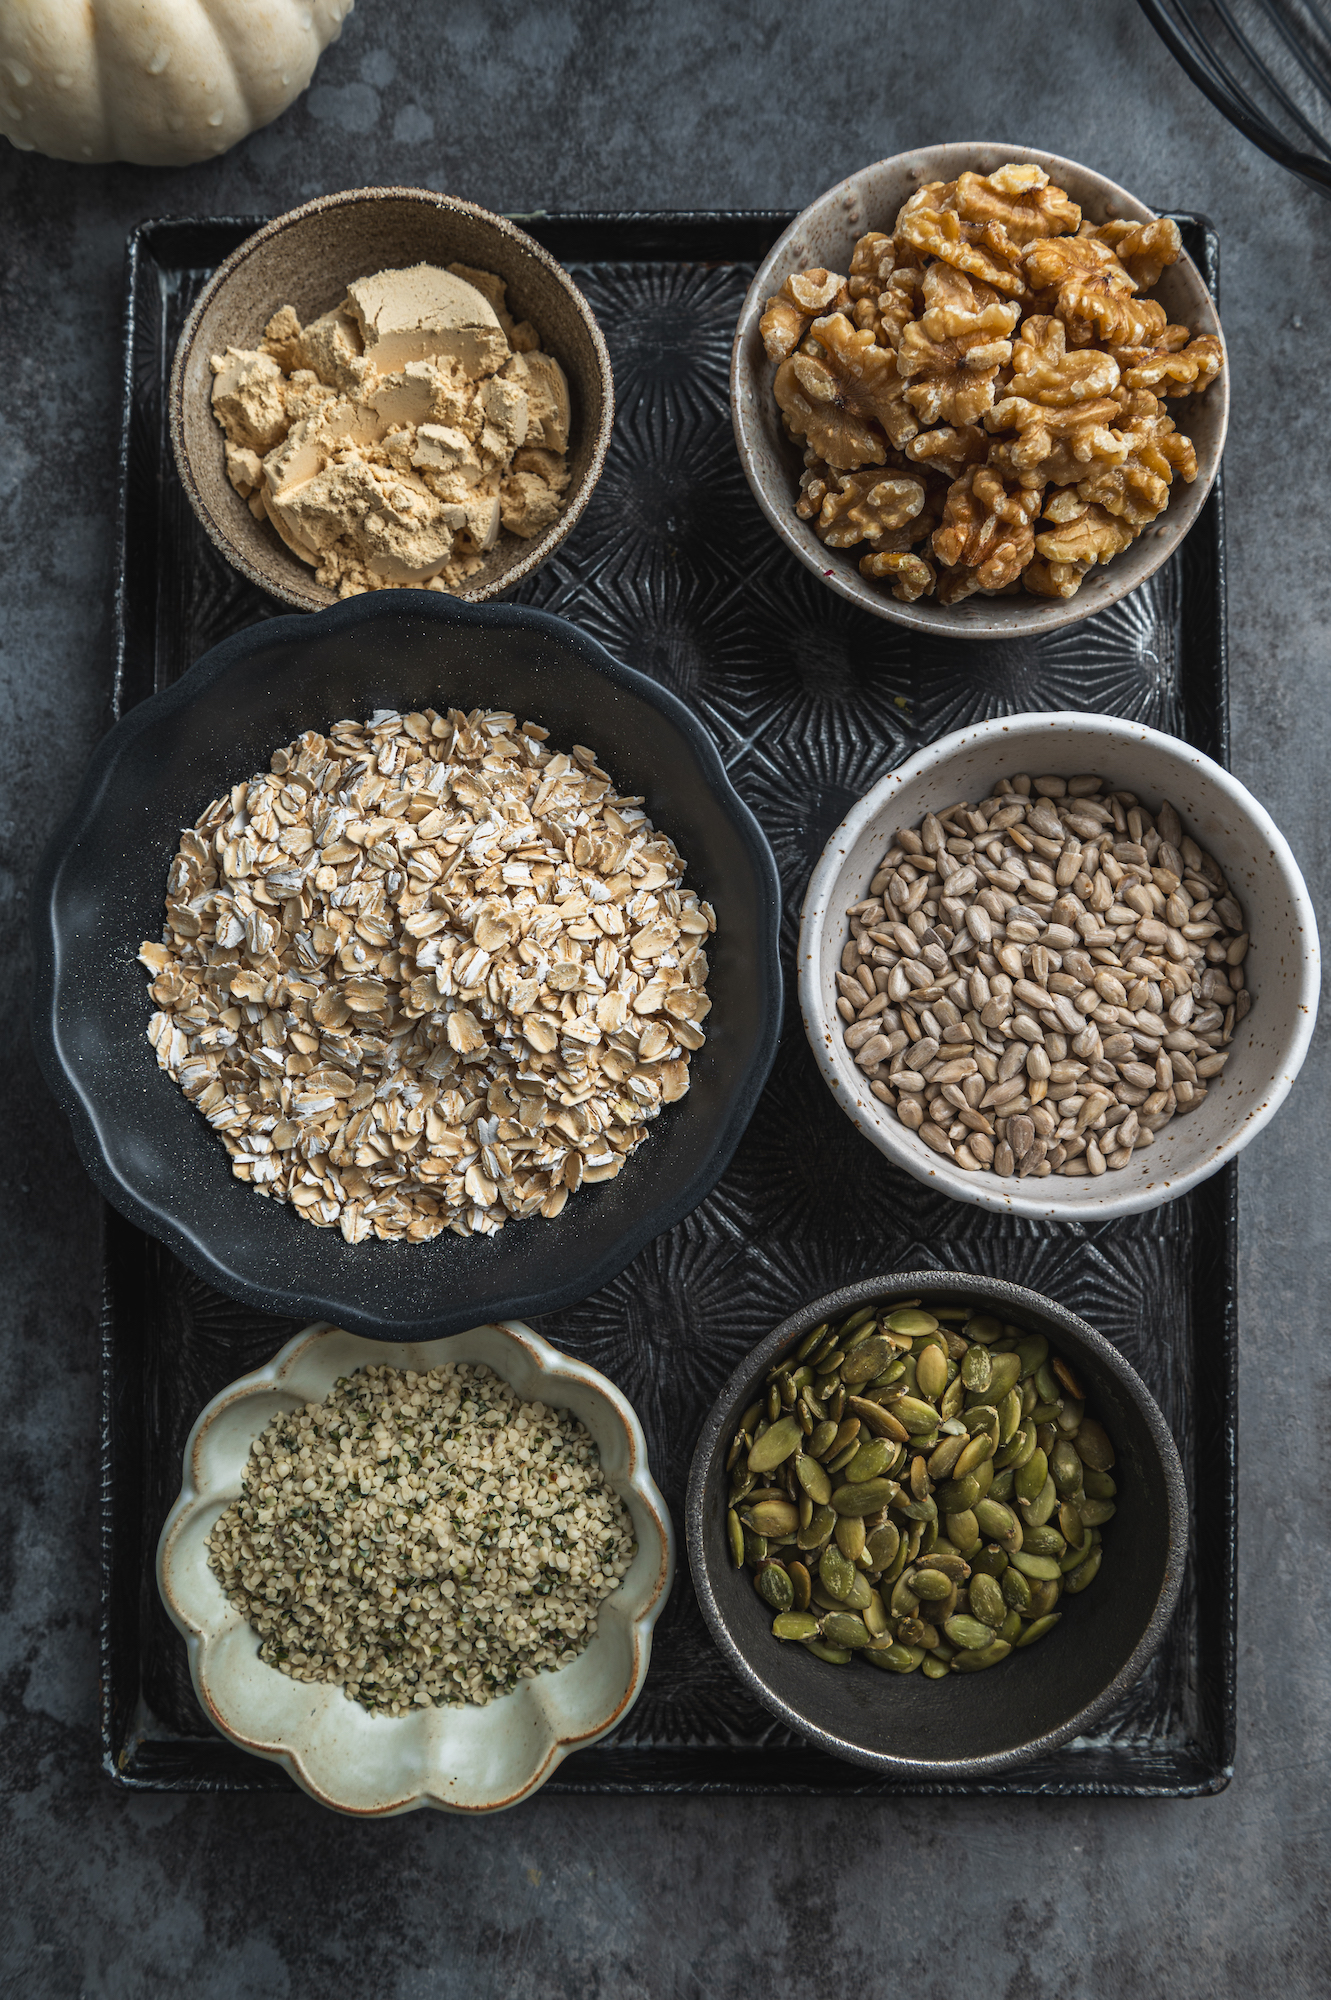 Overhead view of ingredients of granola in beautiful bowls by teri-ann carty